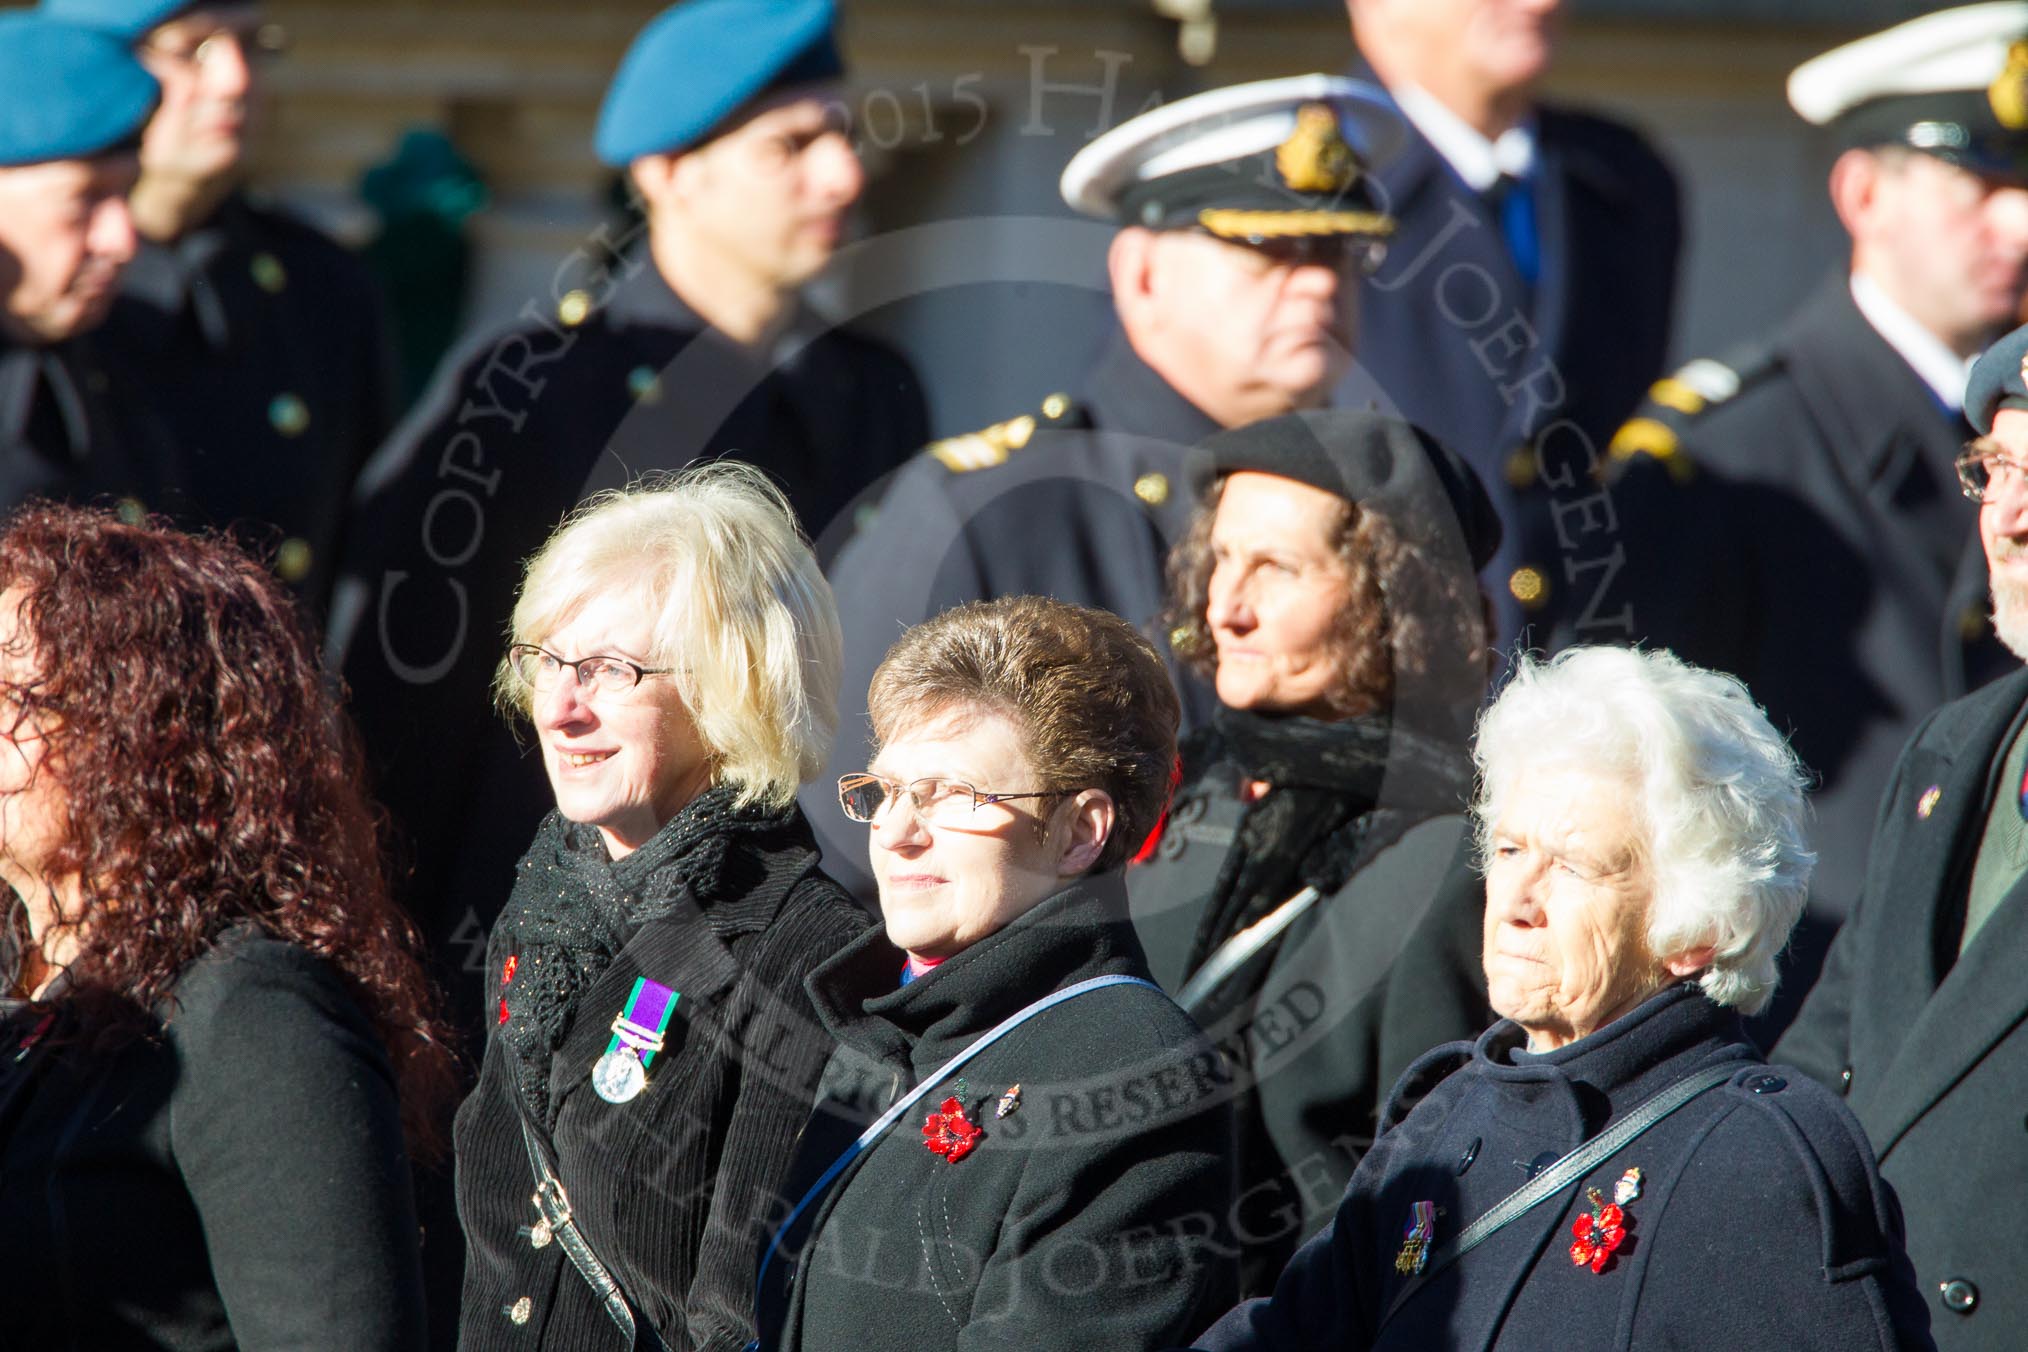 Remembrance Sunday Cenotaph March Past 2013: D13 - The Royal British Legion. There are more photos of this large group, please email Cenotaph@HaraldJoergens.com if interested..
Press stand opposite the Foreign Office building, Whitehall, London SW1,
London,
Greater London,
United Kingdom,
on 10 November 2013 at 11:40, image #113